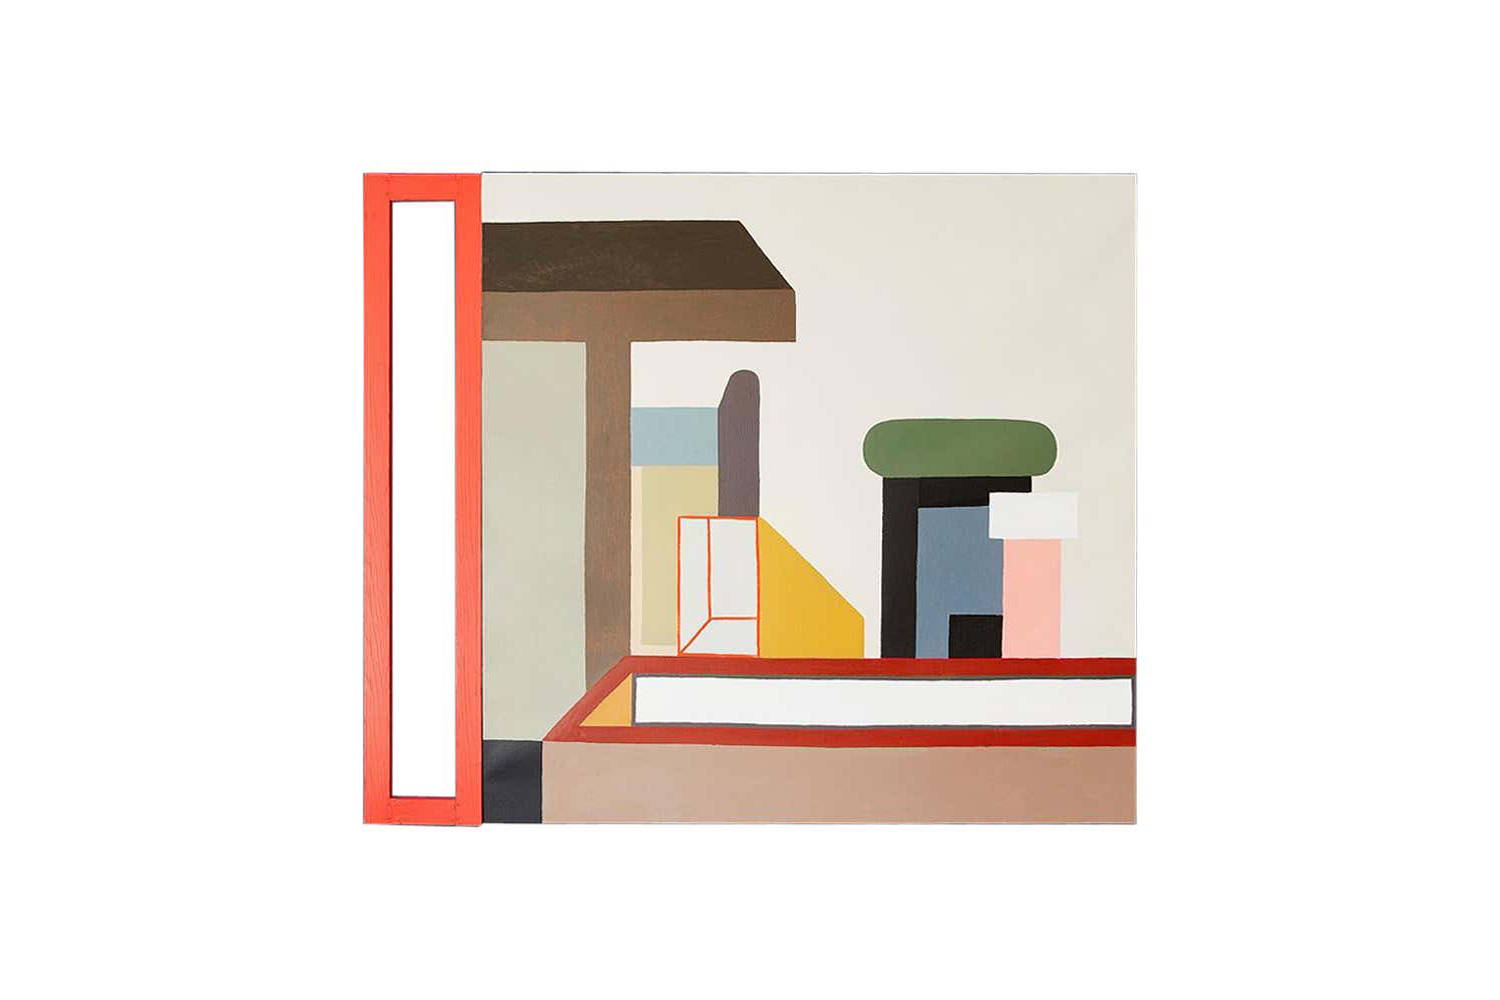 the natalie du pasquier oil on canvas piece on the wall was painted in \20\17 b 22